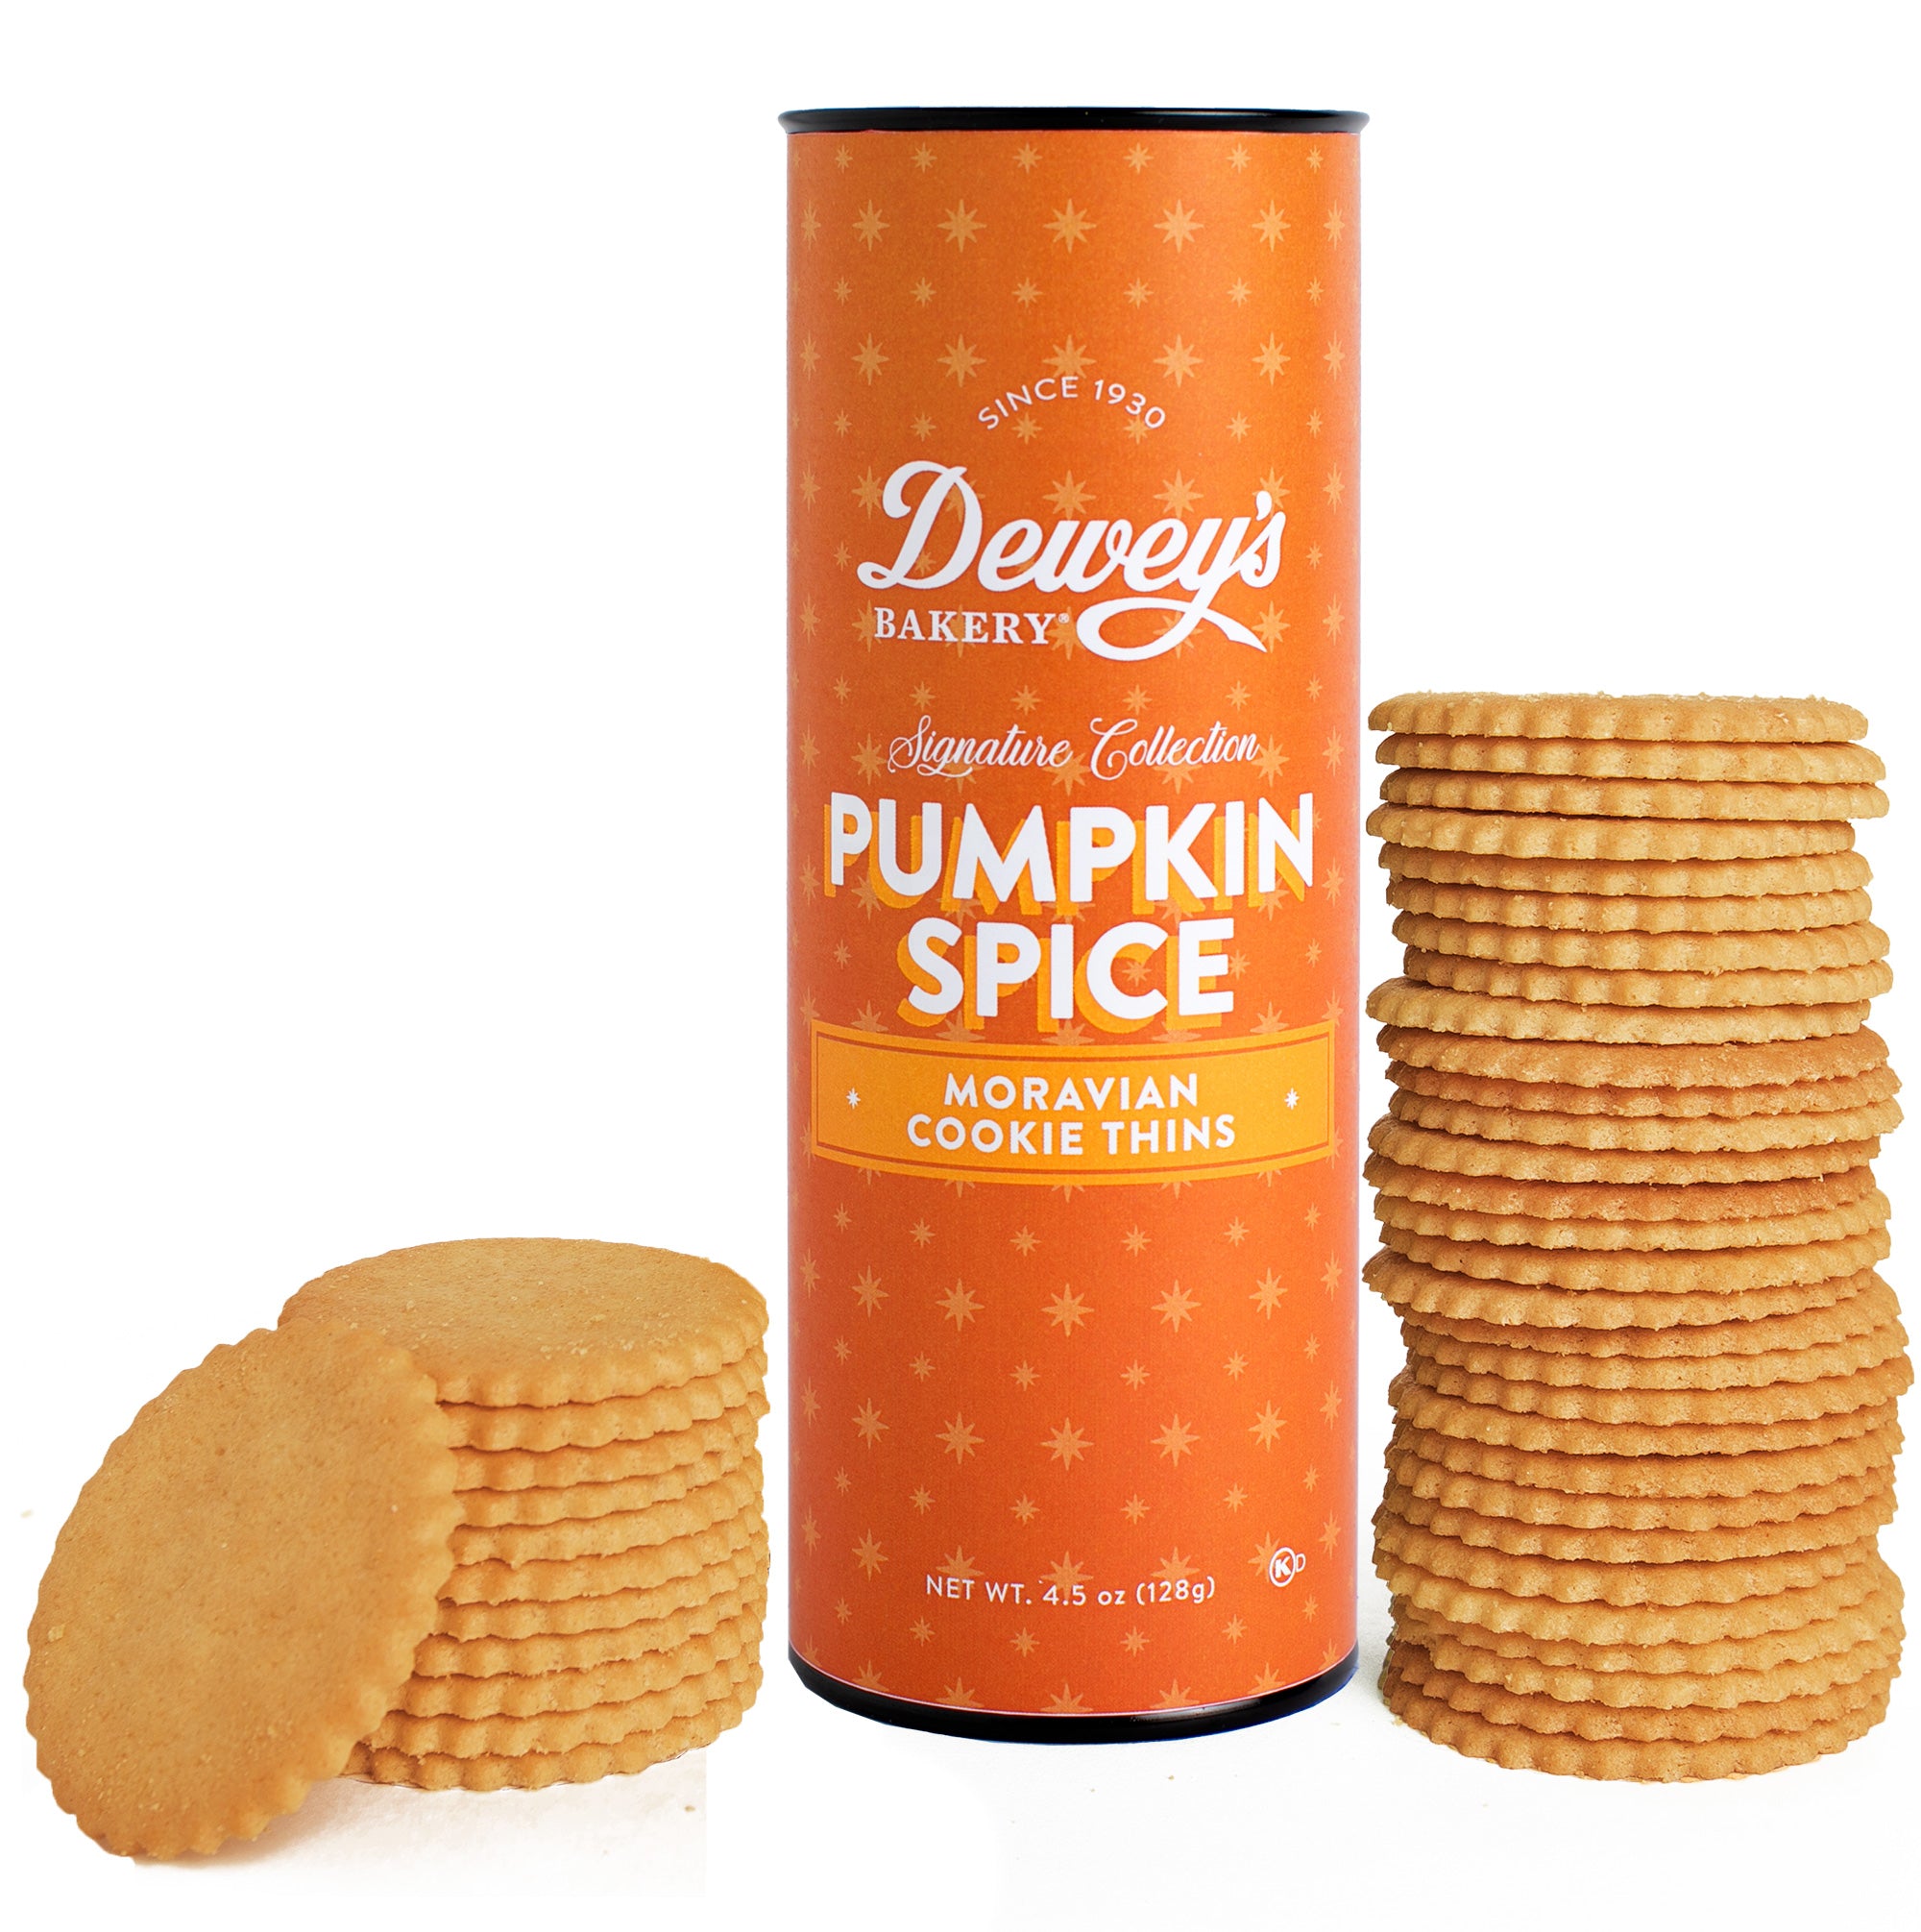 Pumpkin Spice Moravian Cookie Thins Tube